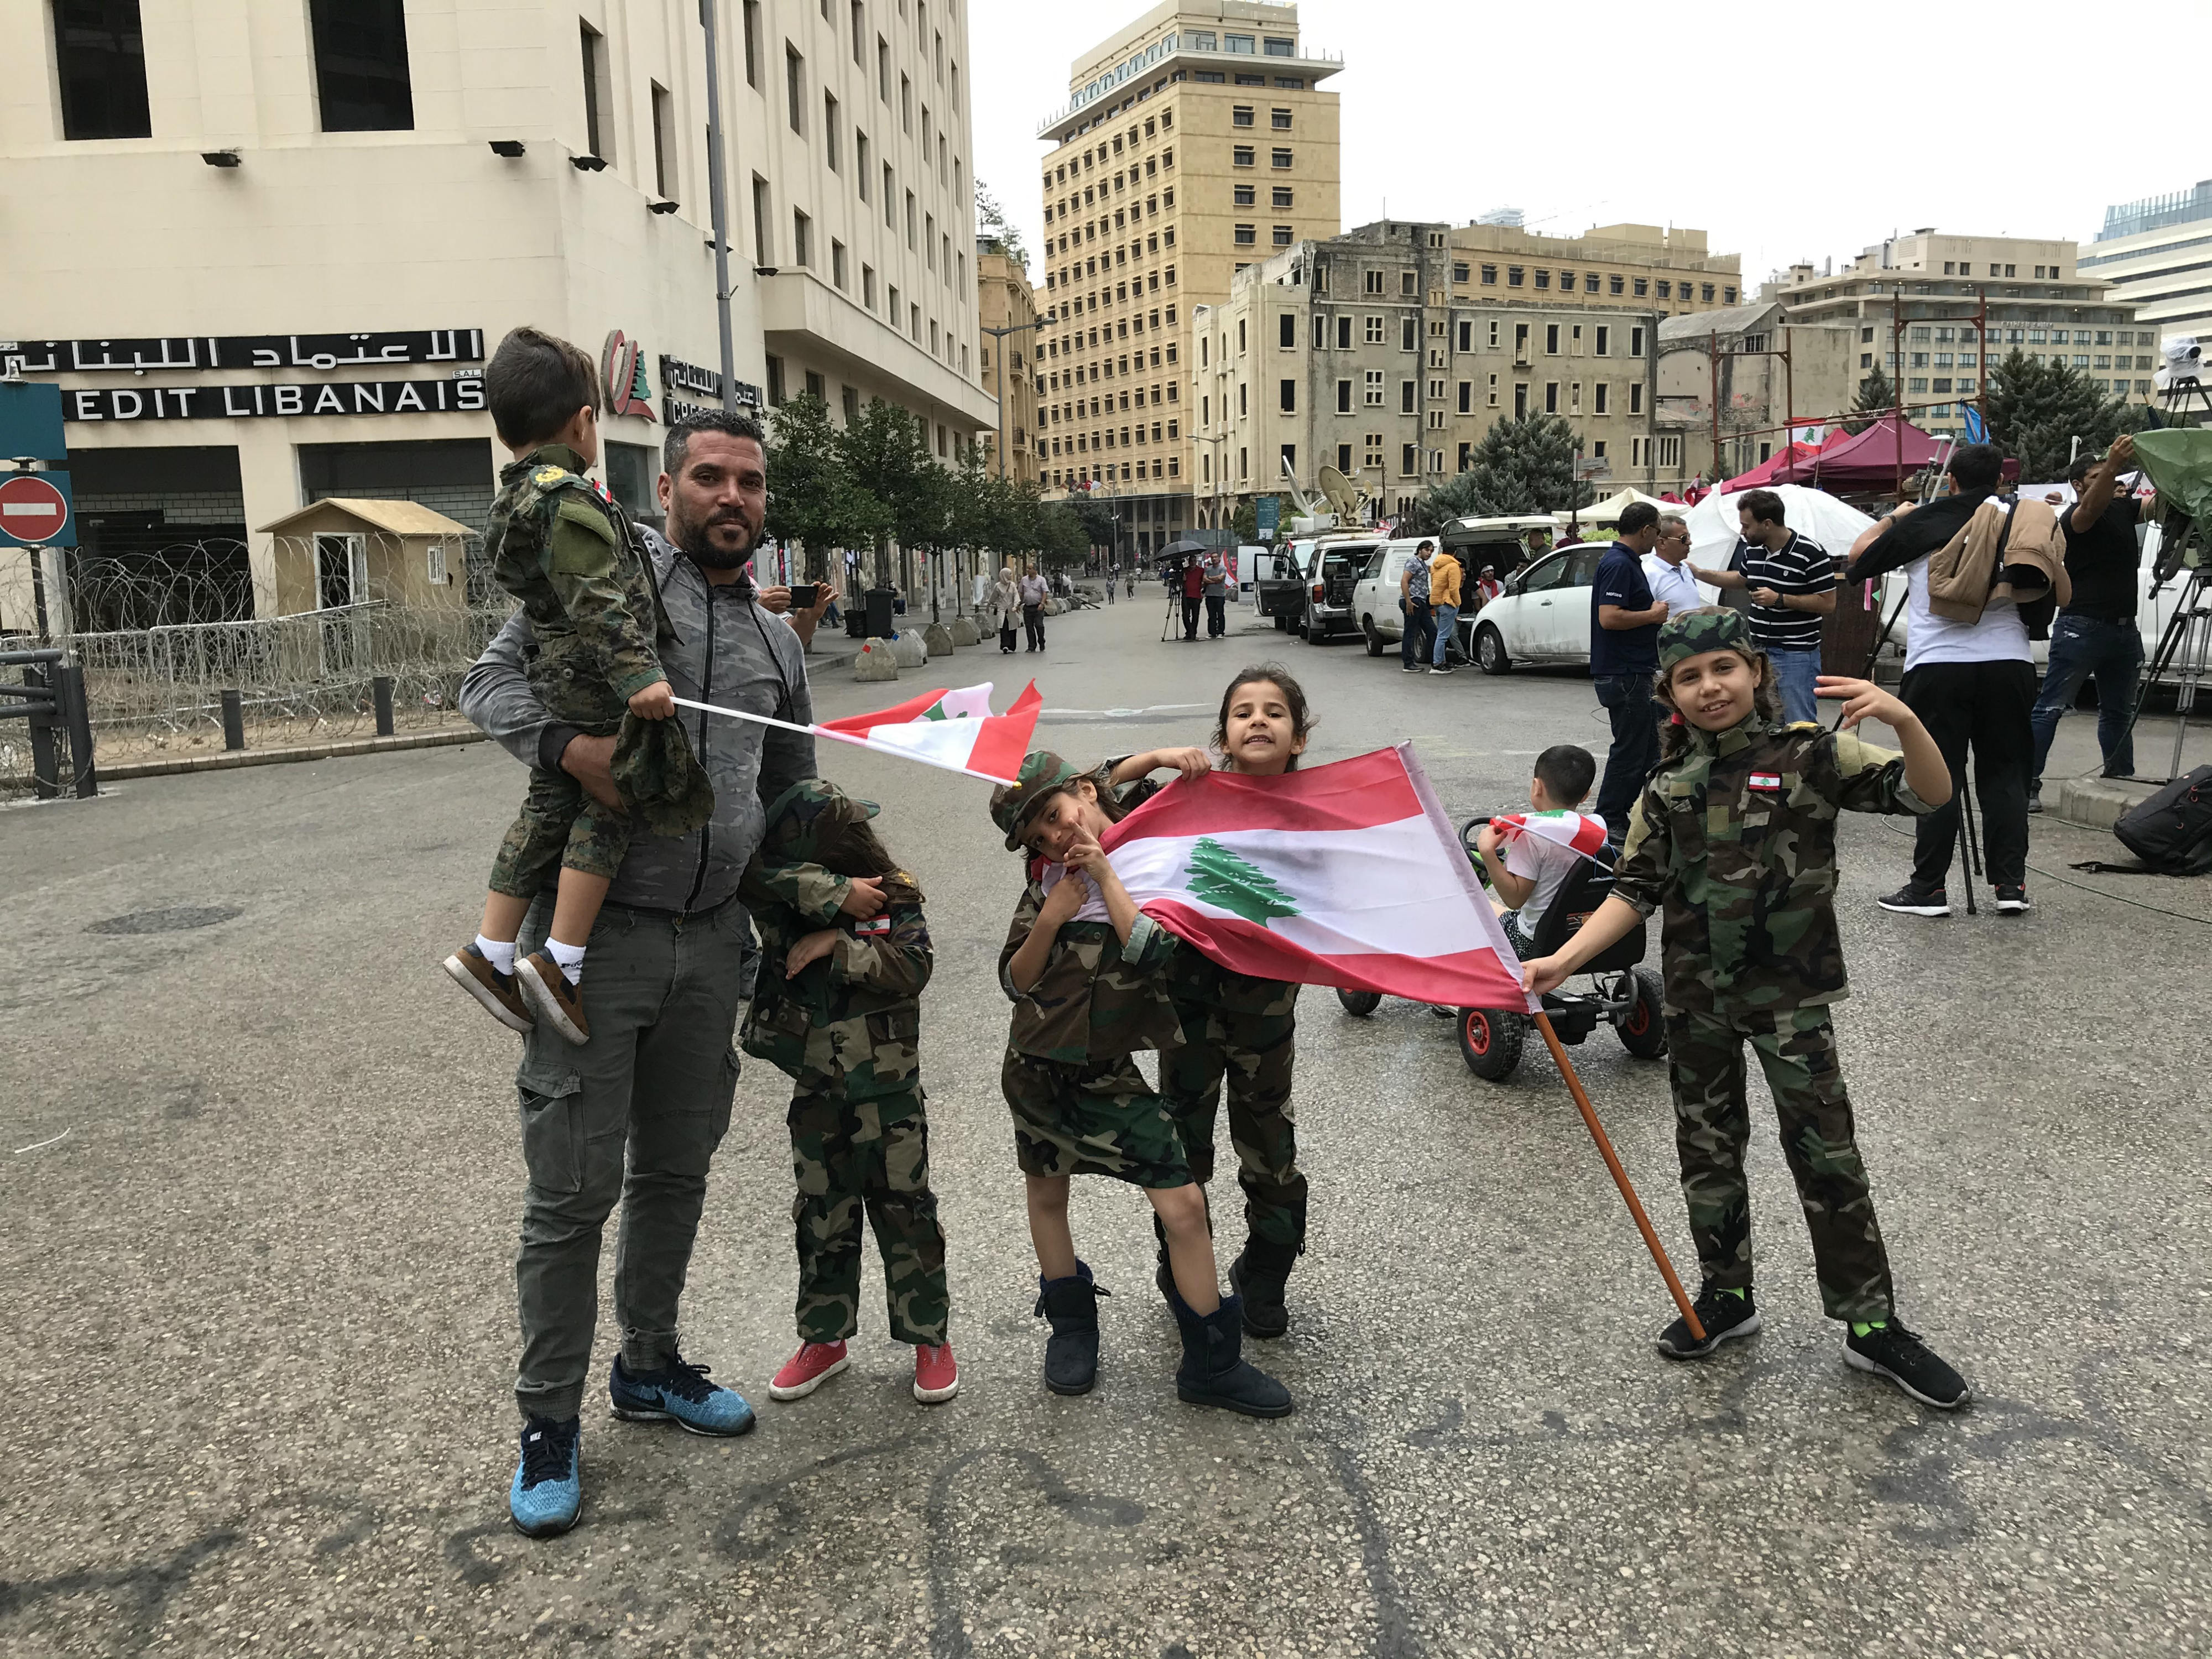 Mohammed Hussein and his children protest in central Beirut (MEE/Heba Nasser)